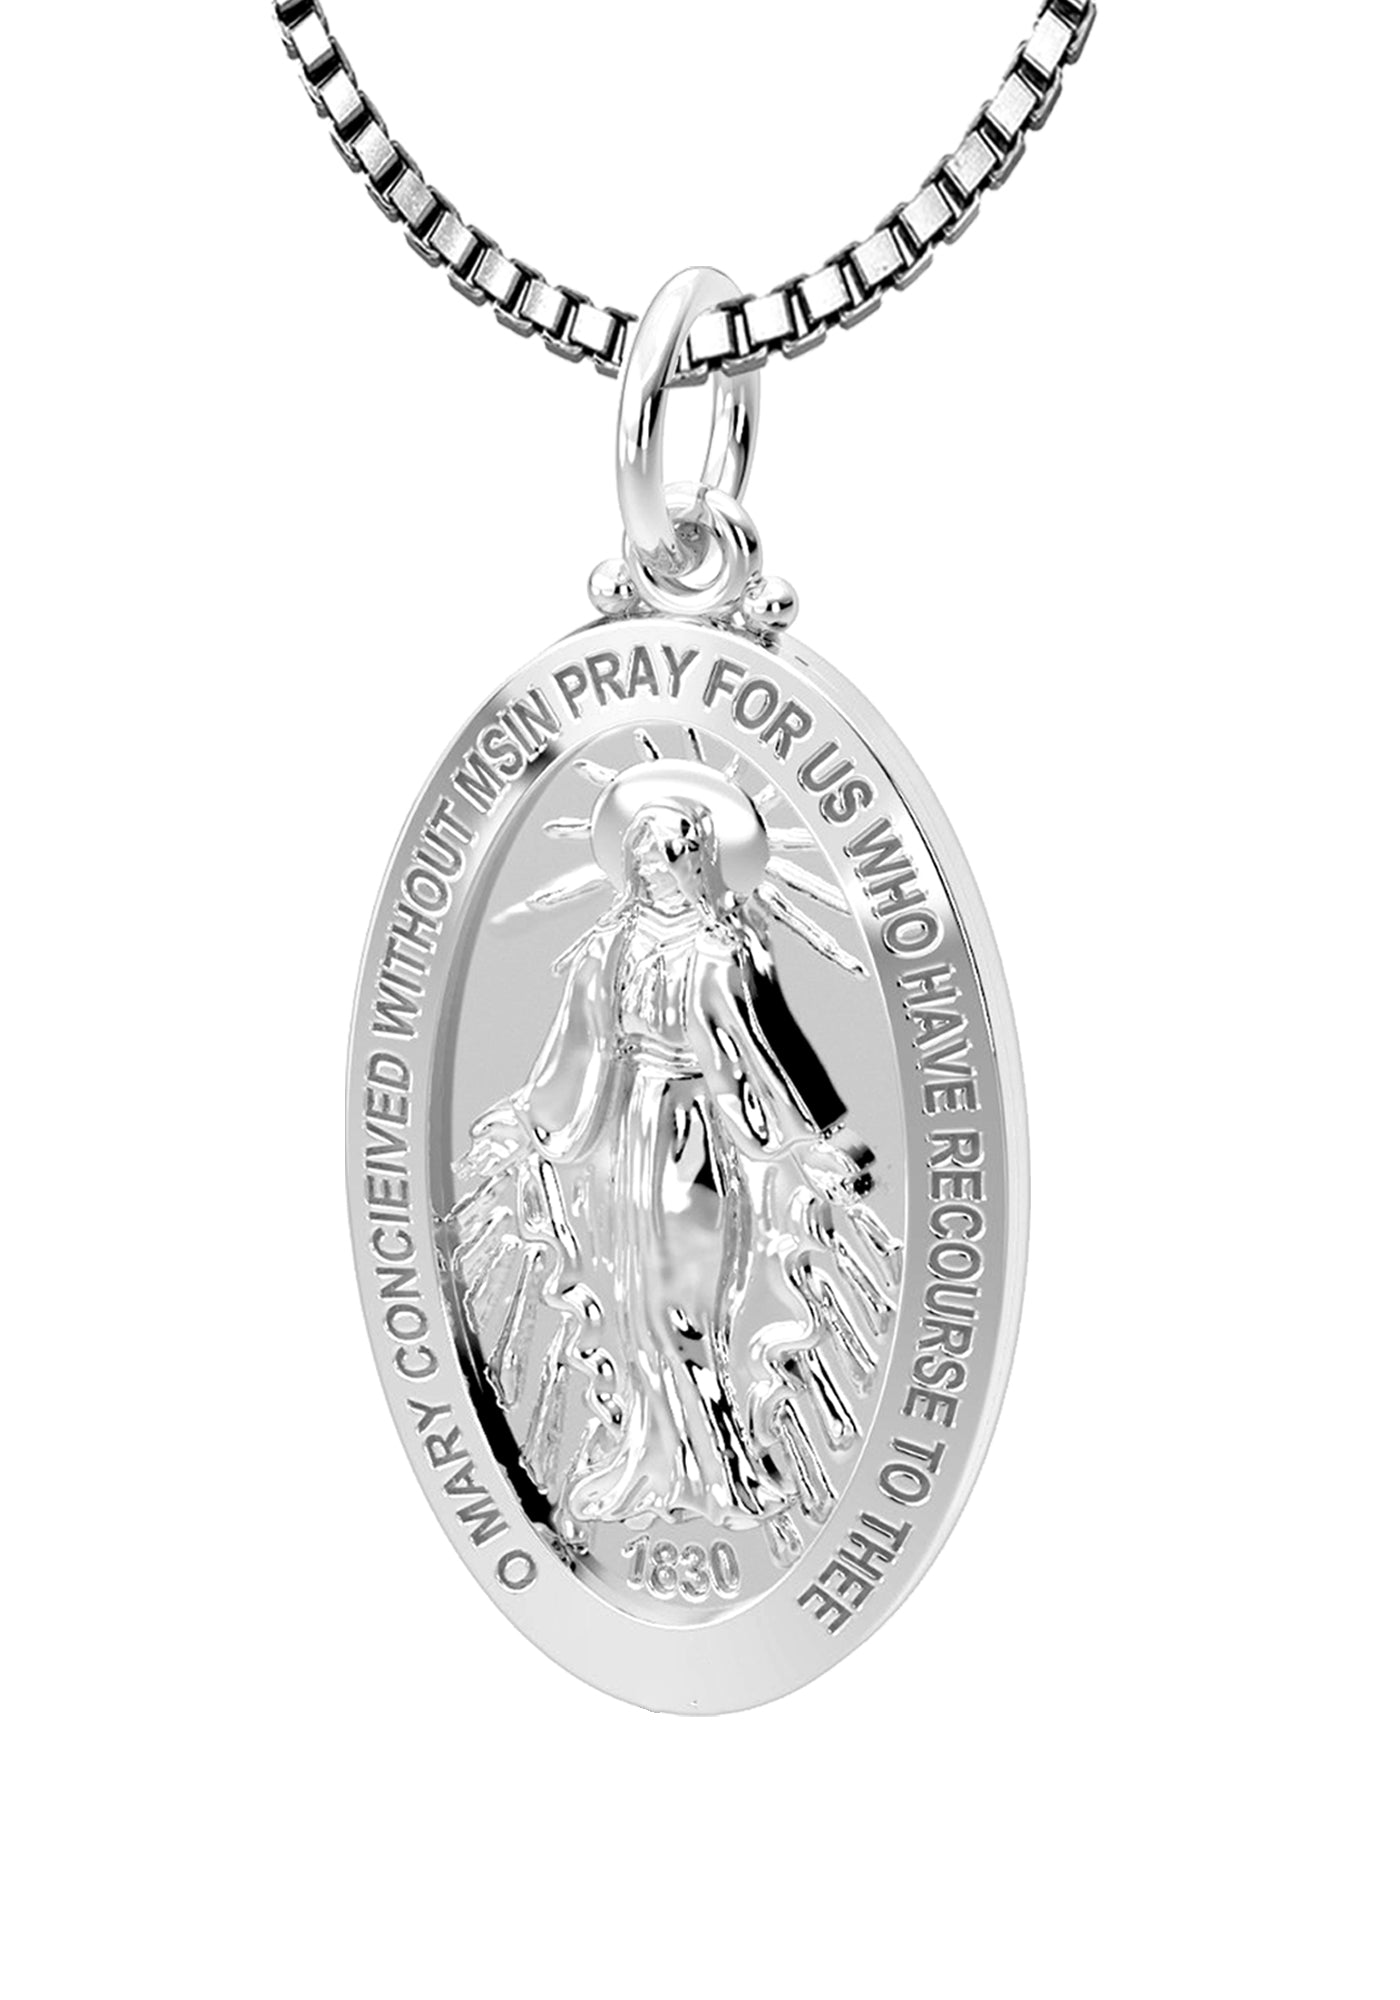 US Jewels Ladies Polished 925 Sterling Silver Large Miraculous Virgin Mary Pendant Necklace, 26mm - US Jewels